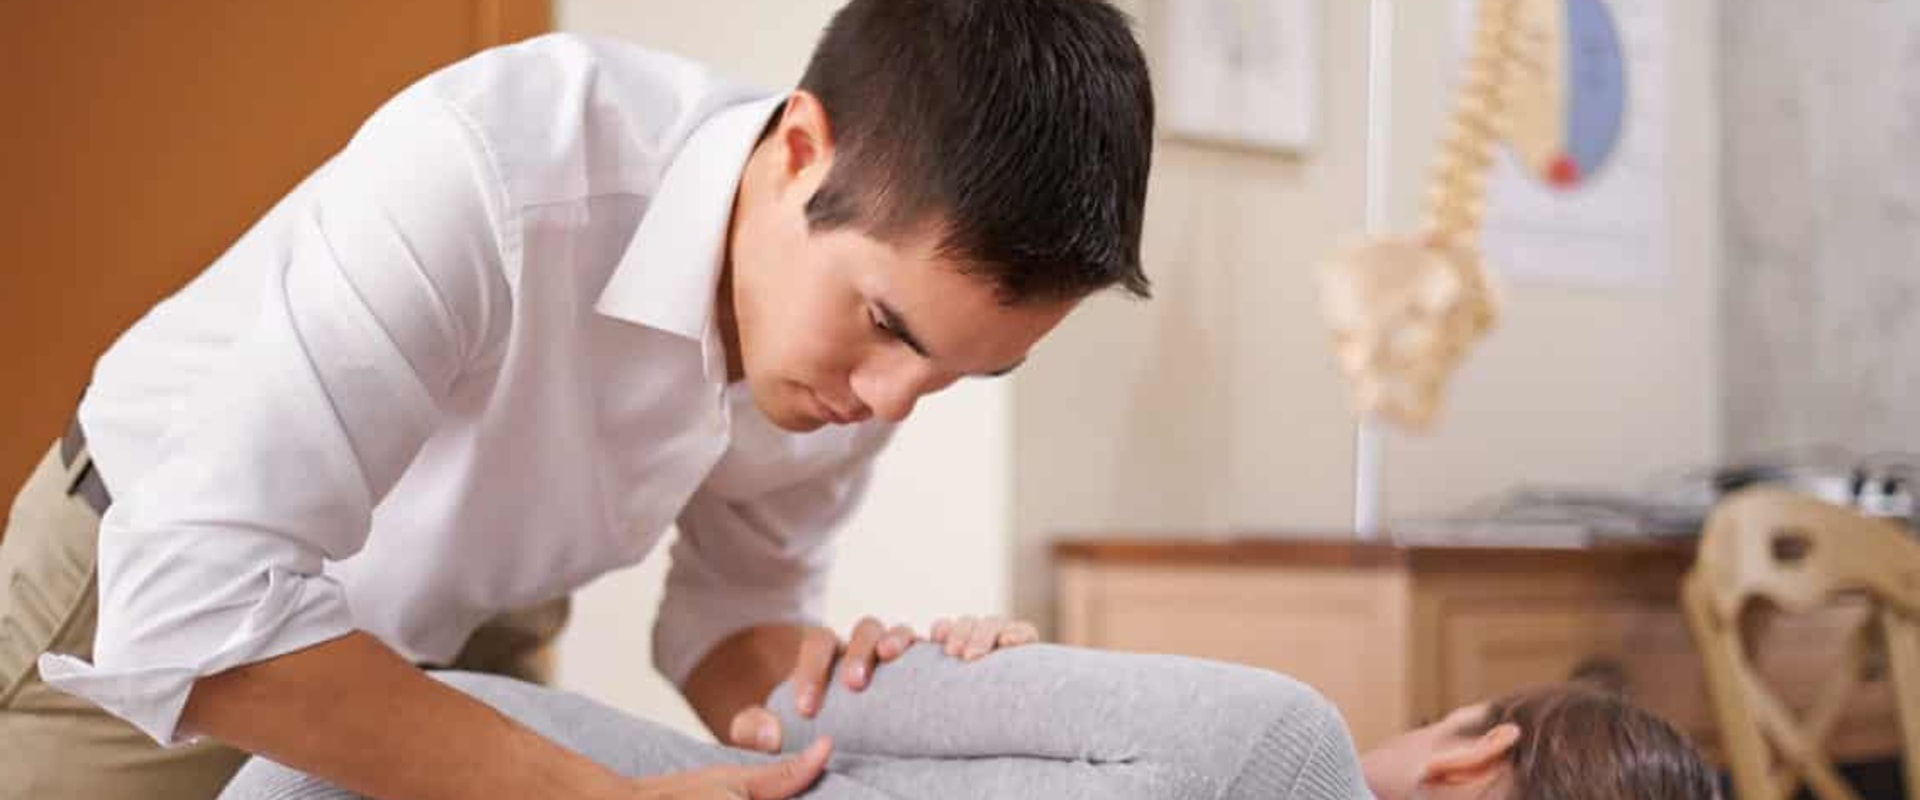 Can Chiropractic Adjustments Help Reduce Inflammation?